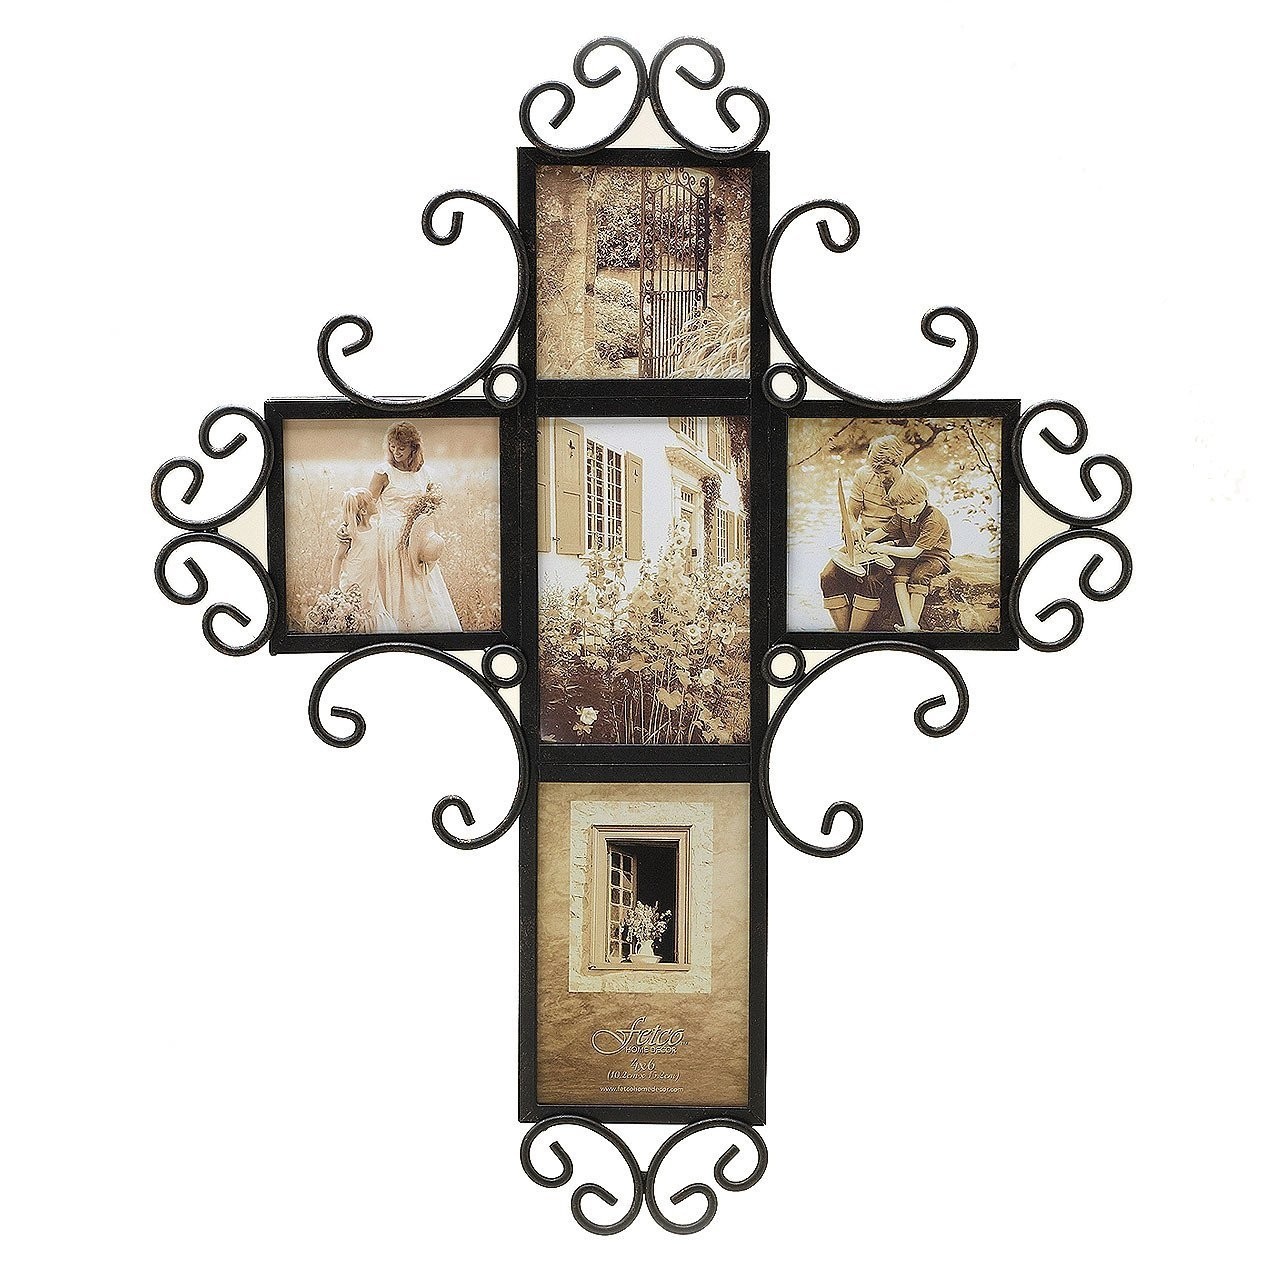 Fetco Home Decor Tuscan Alton Five Opening Wall Collage